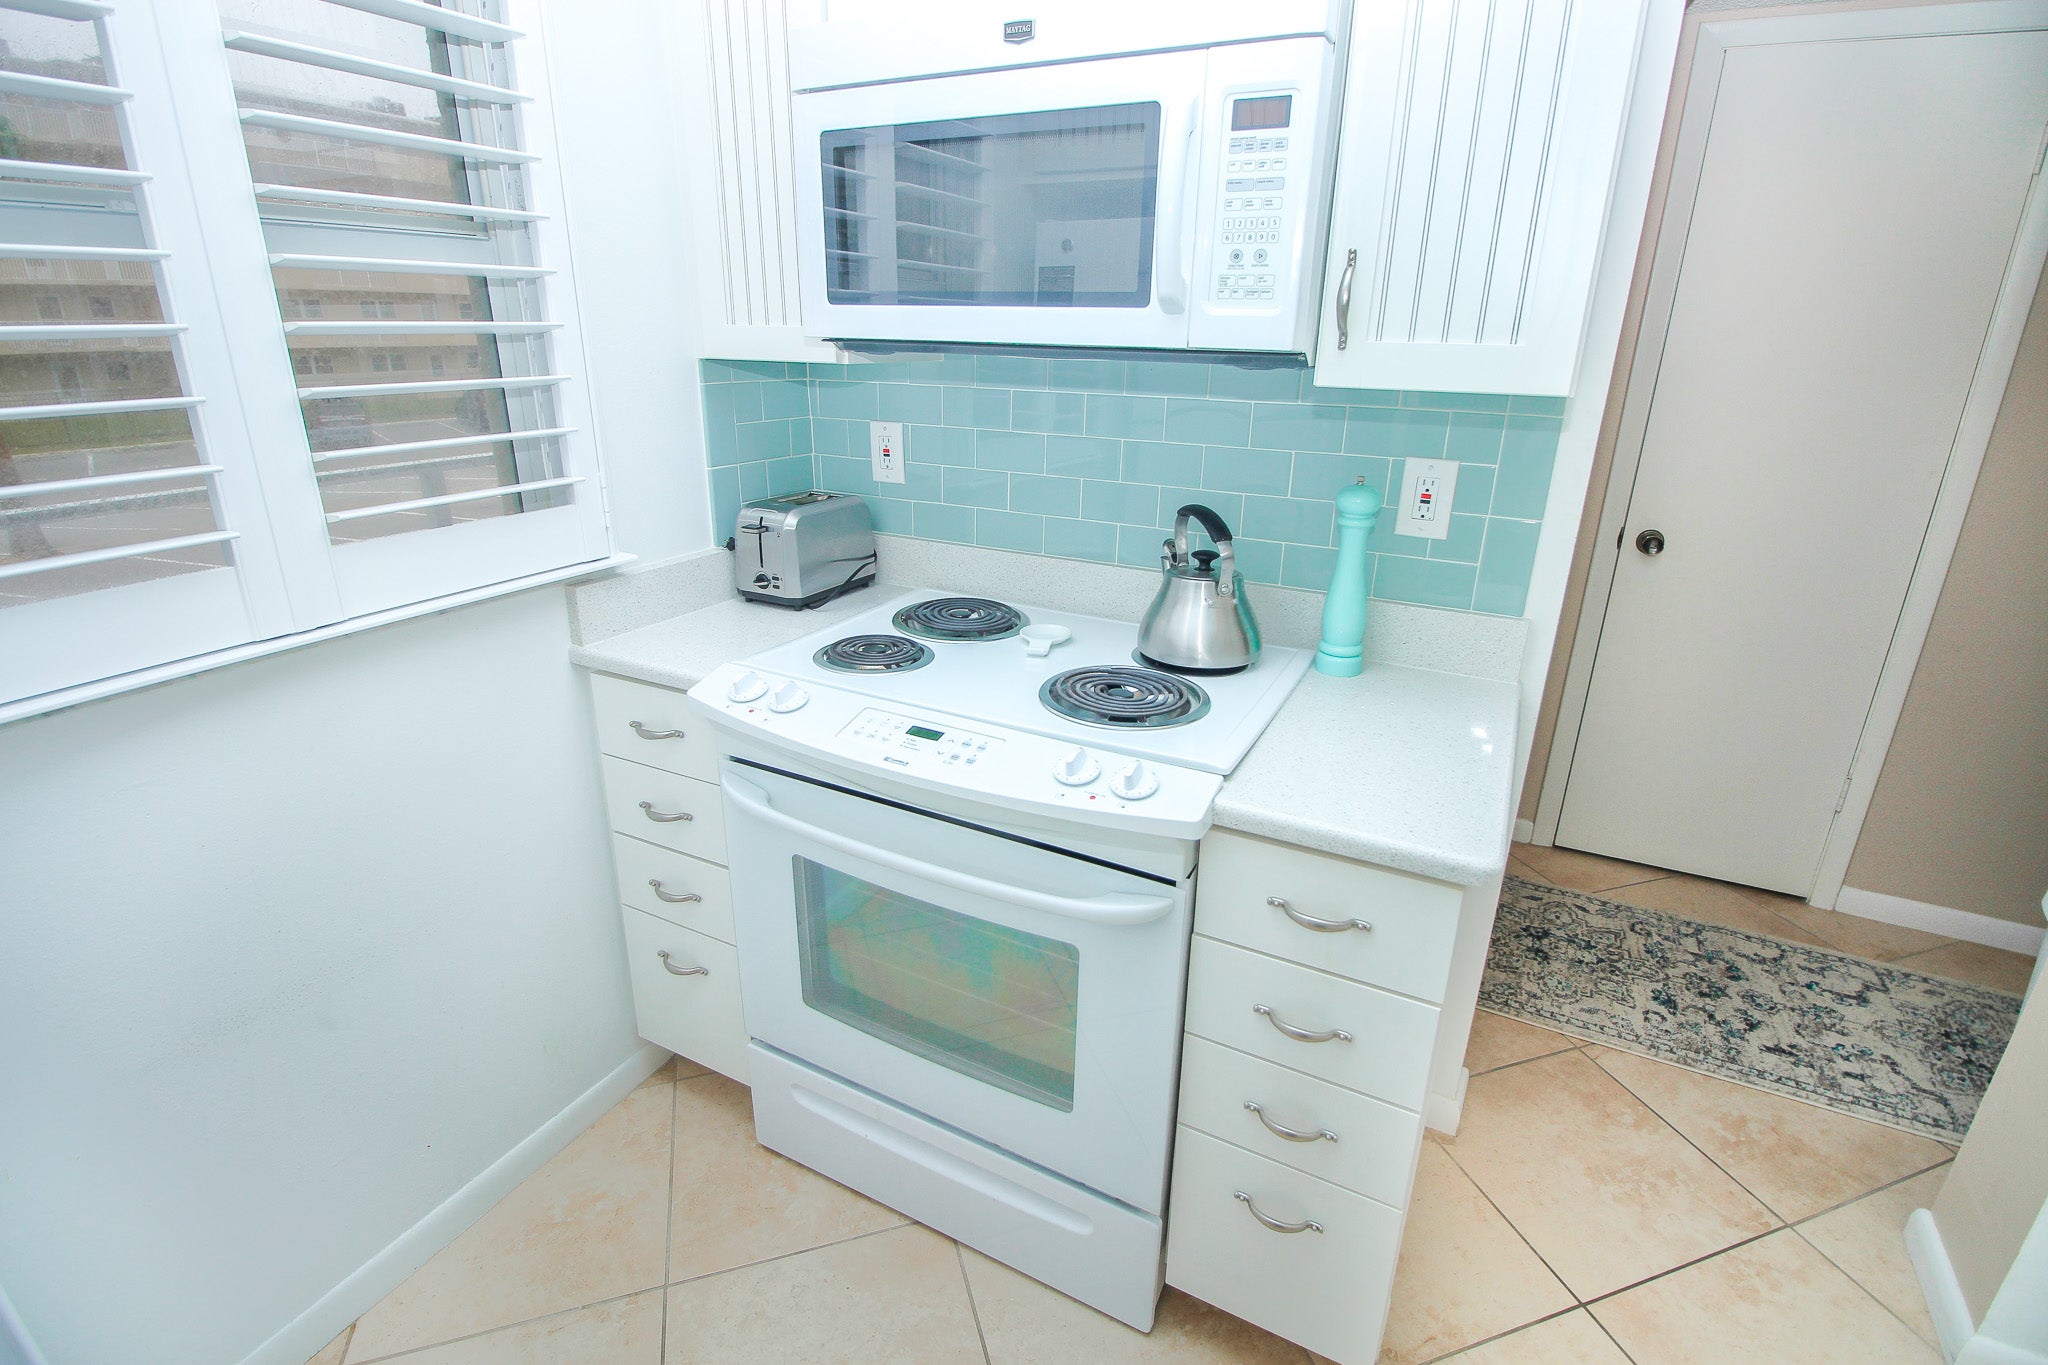 Separate Stove & Microwave Area